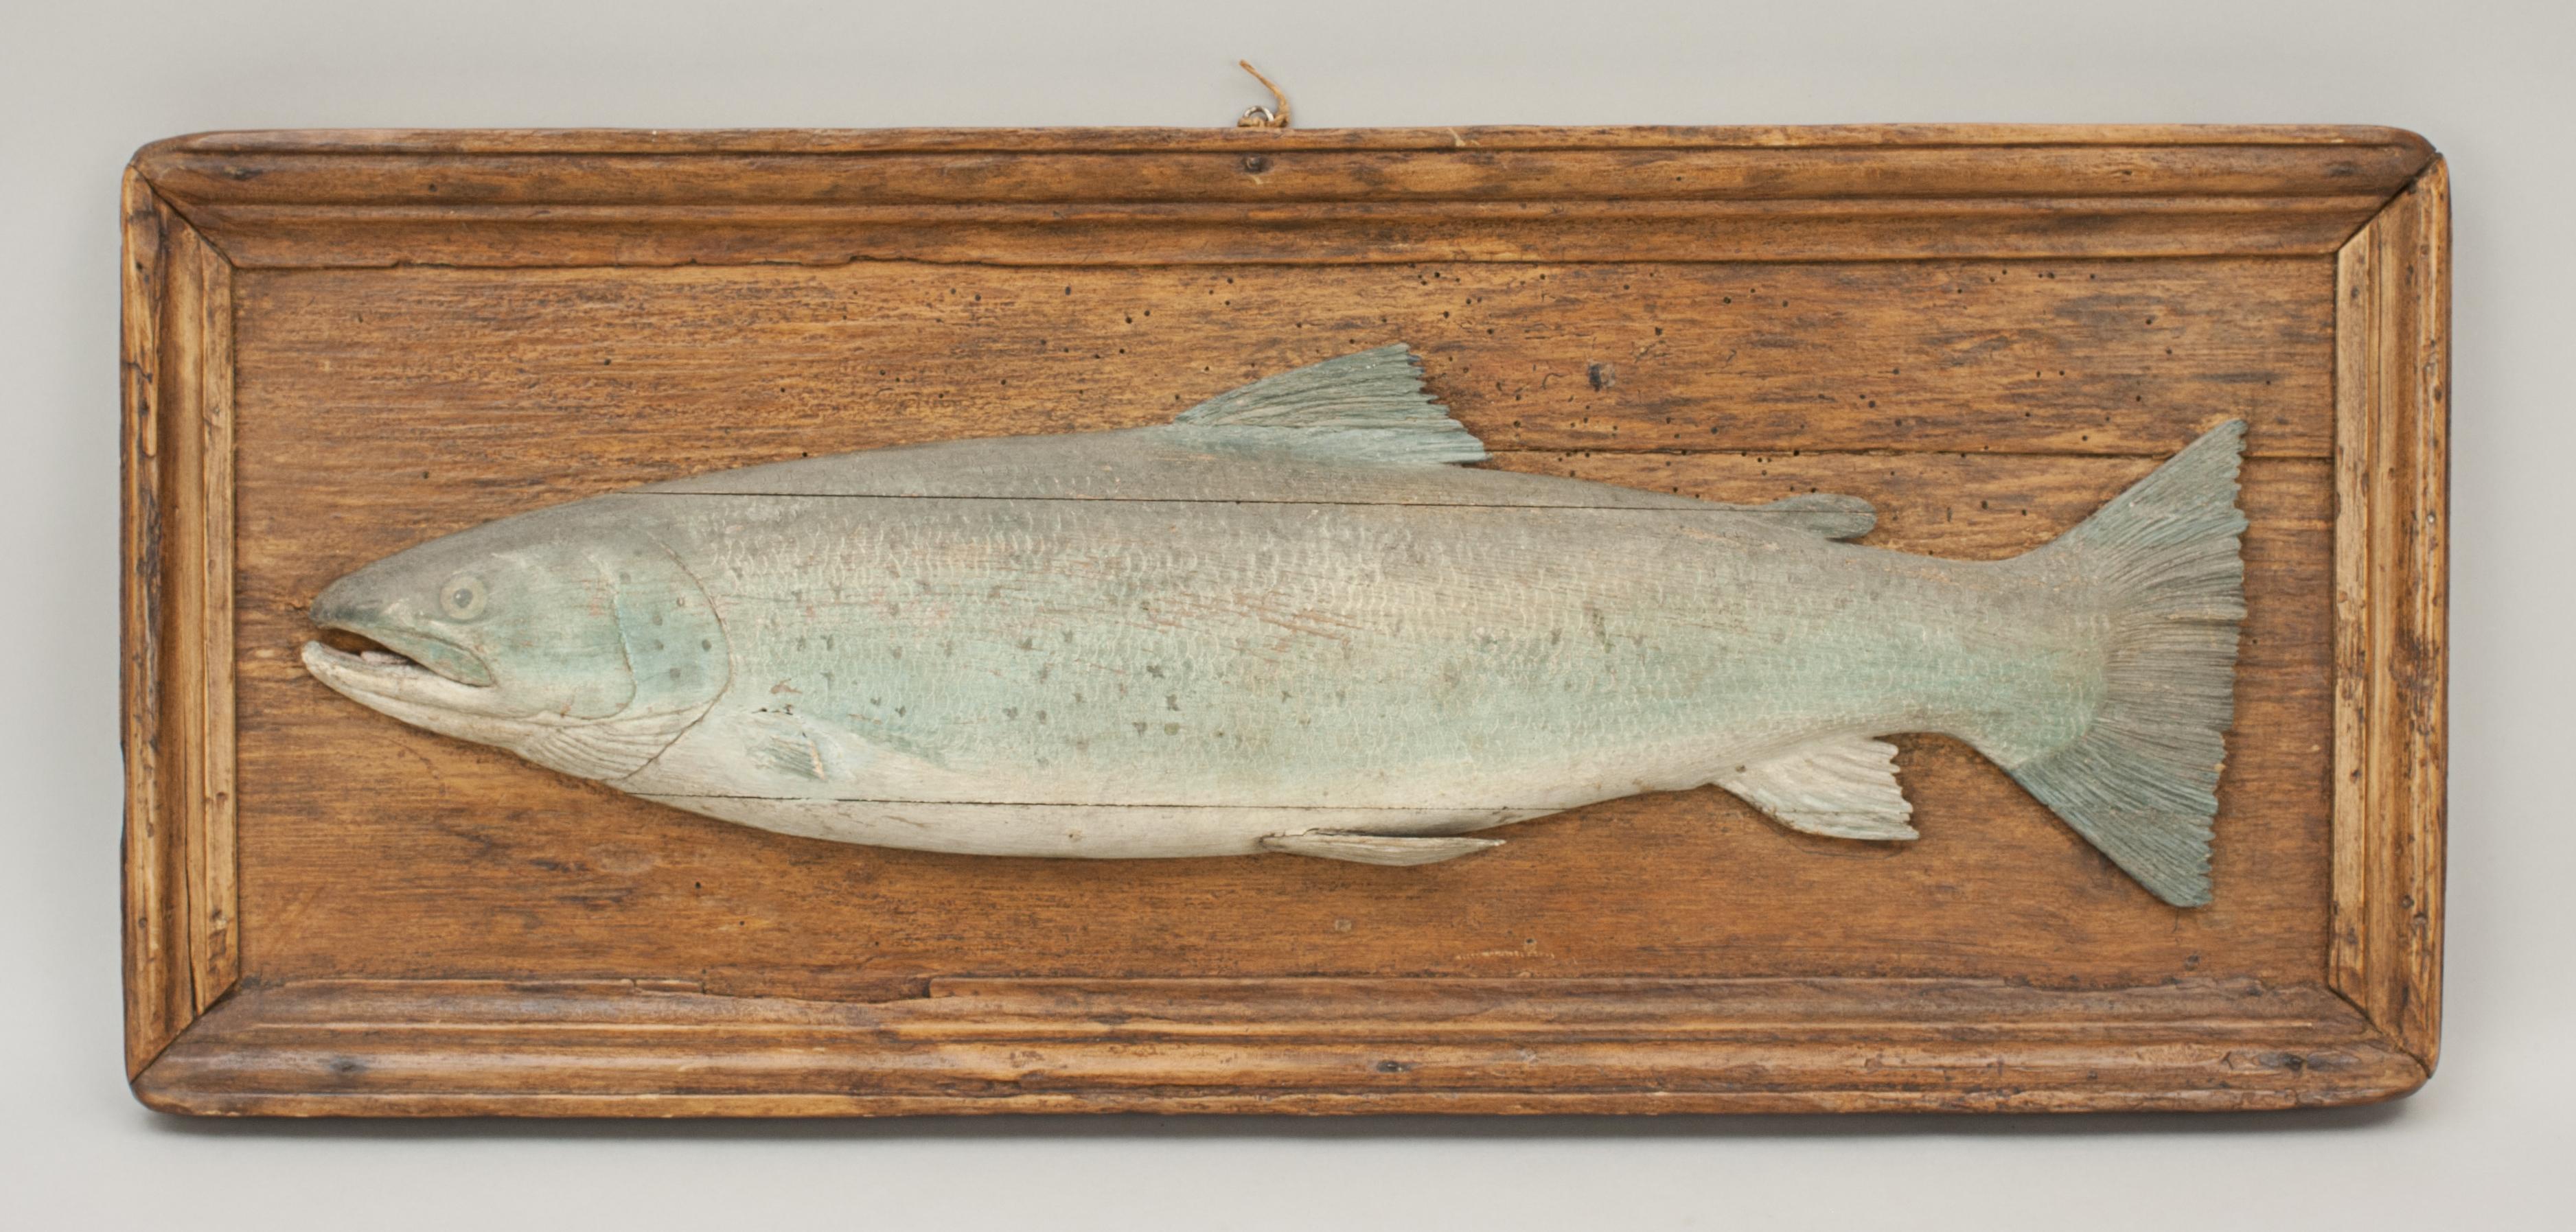 Carved trout trophy fish model.
An excellent carved wooden trout on backboard. The ½ block trout is carved with the dorsal fin, adipose fin, pectoral fin, pelvic fin, anal fin and tail fin. The fish is beautifully executed and painted to a high